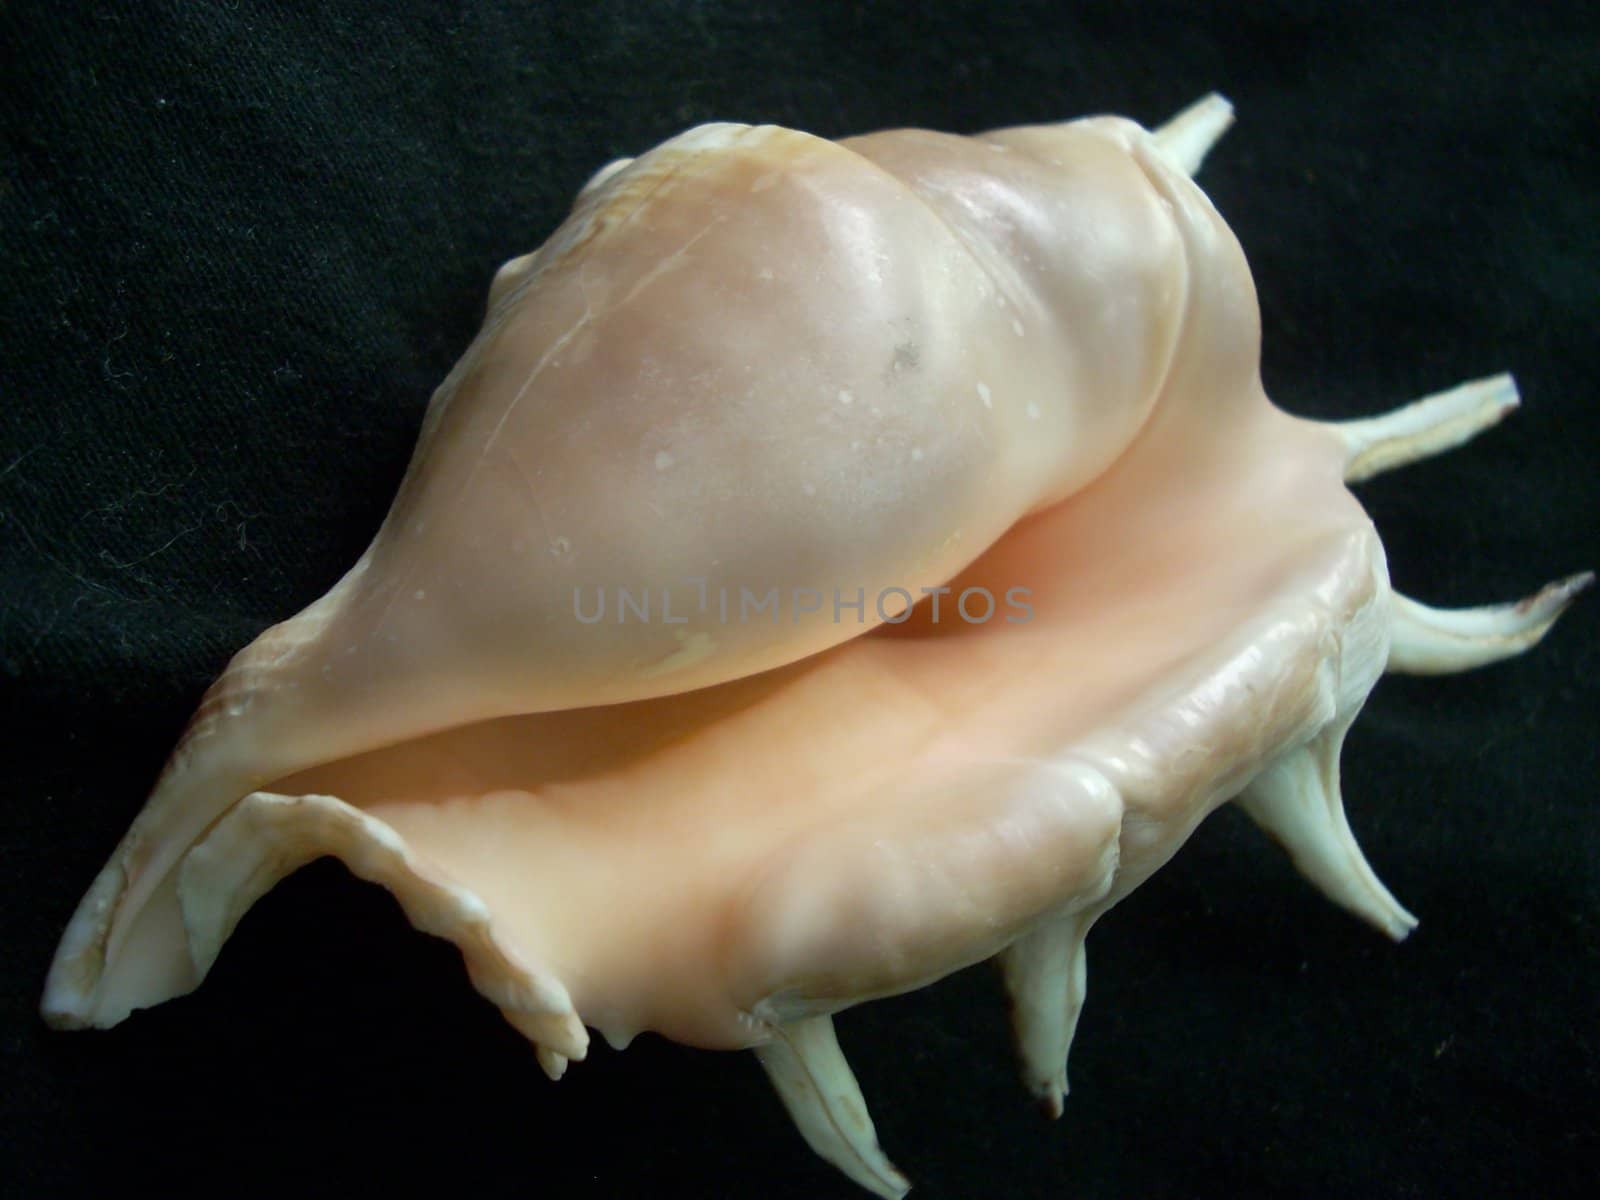 A picture of a seashell